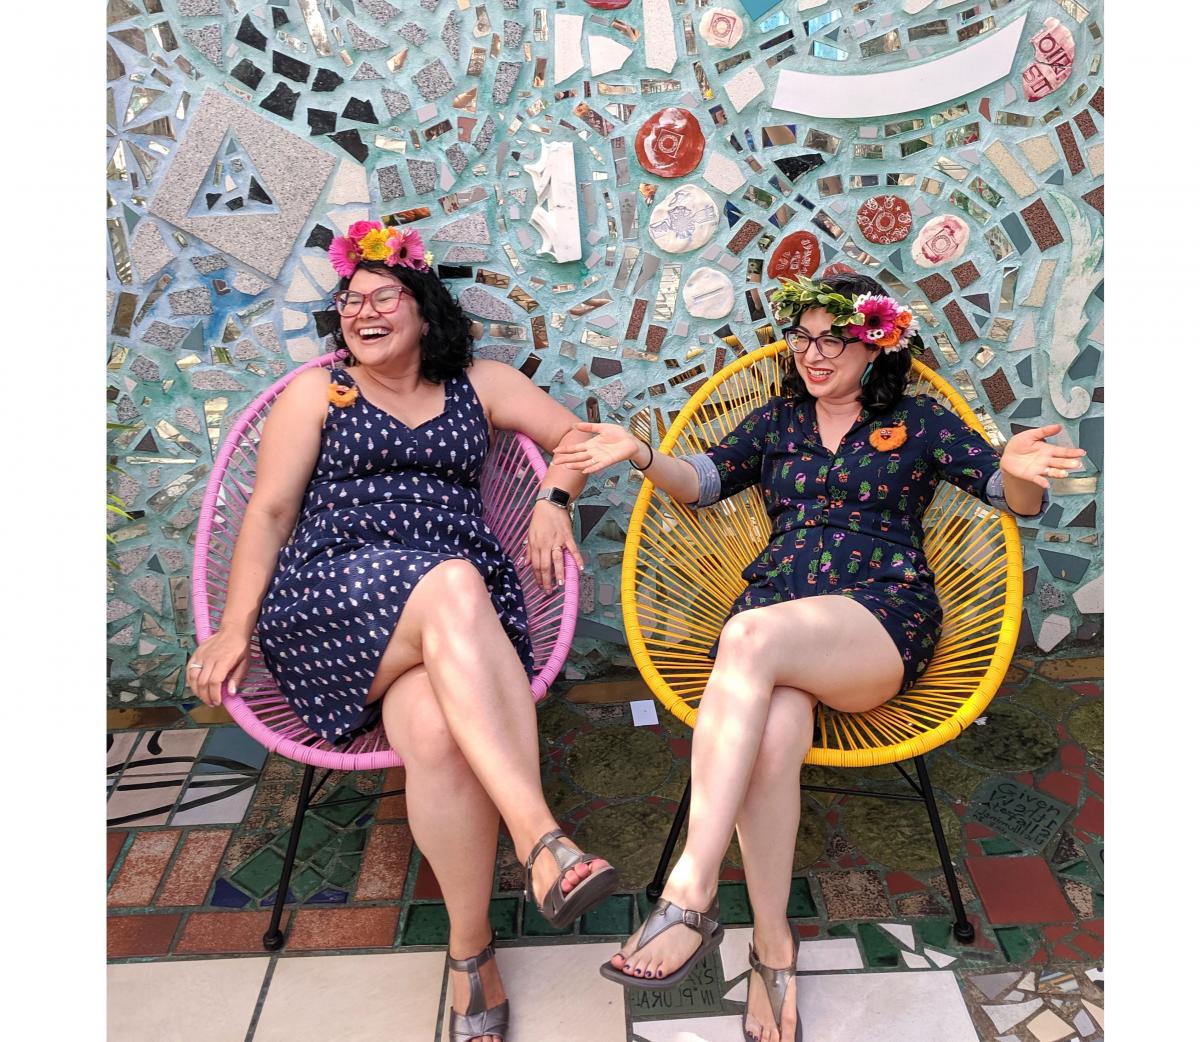 A photo of two women sitting on chairs laughing. 